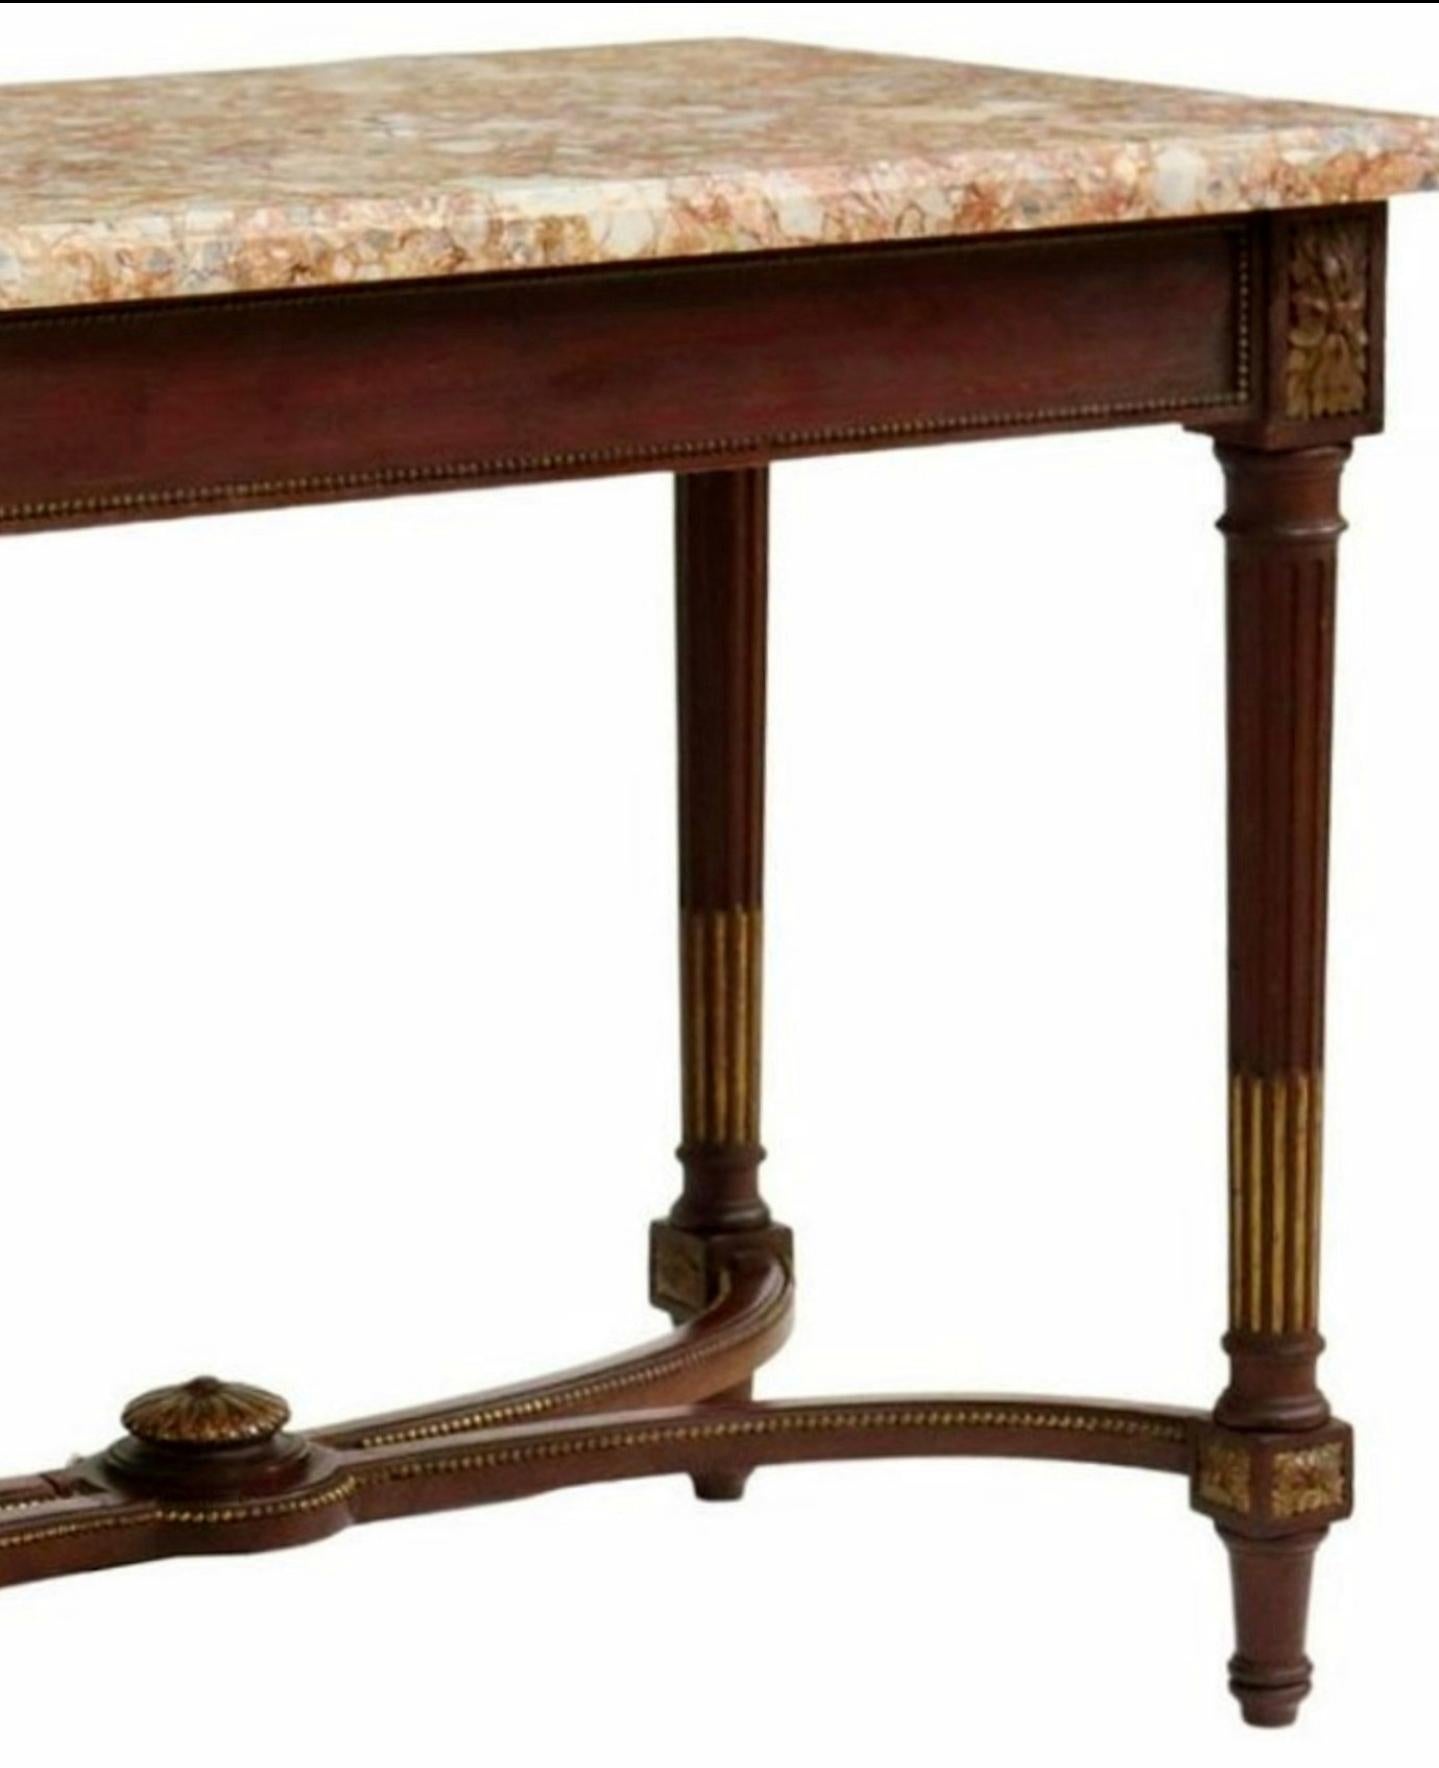 Breccia Marble Antique French Louis XVI Style Mahogany Marble-Top Center Table For Sale